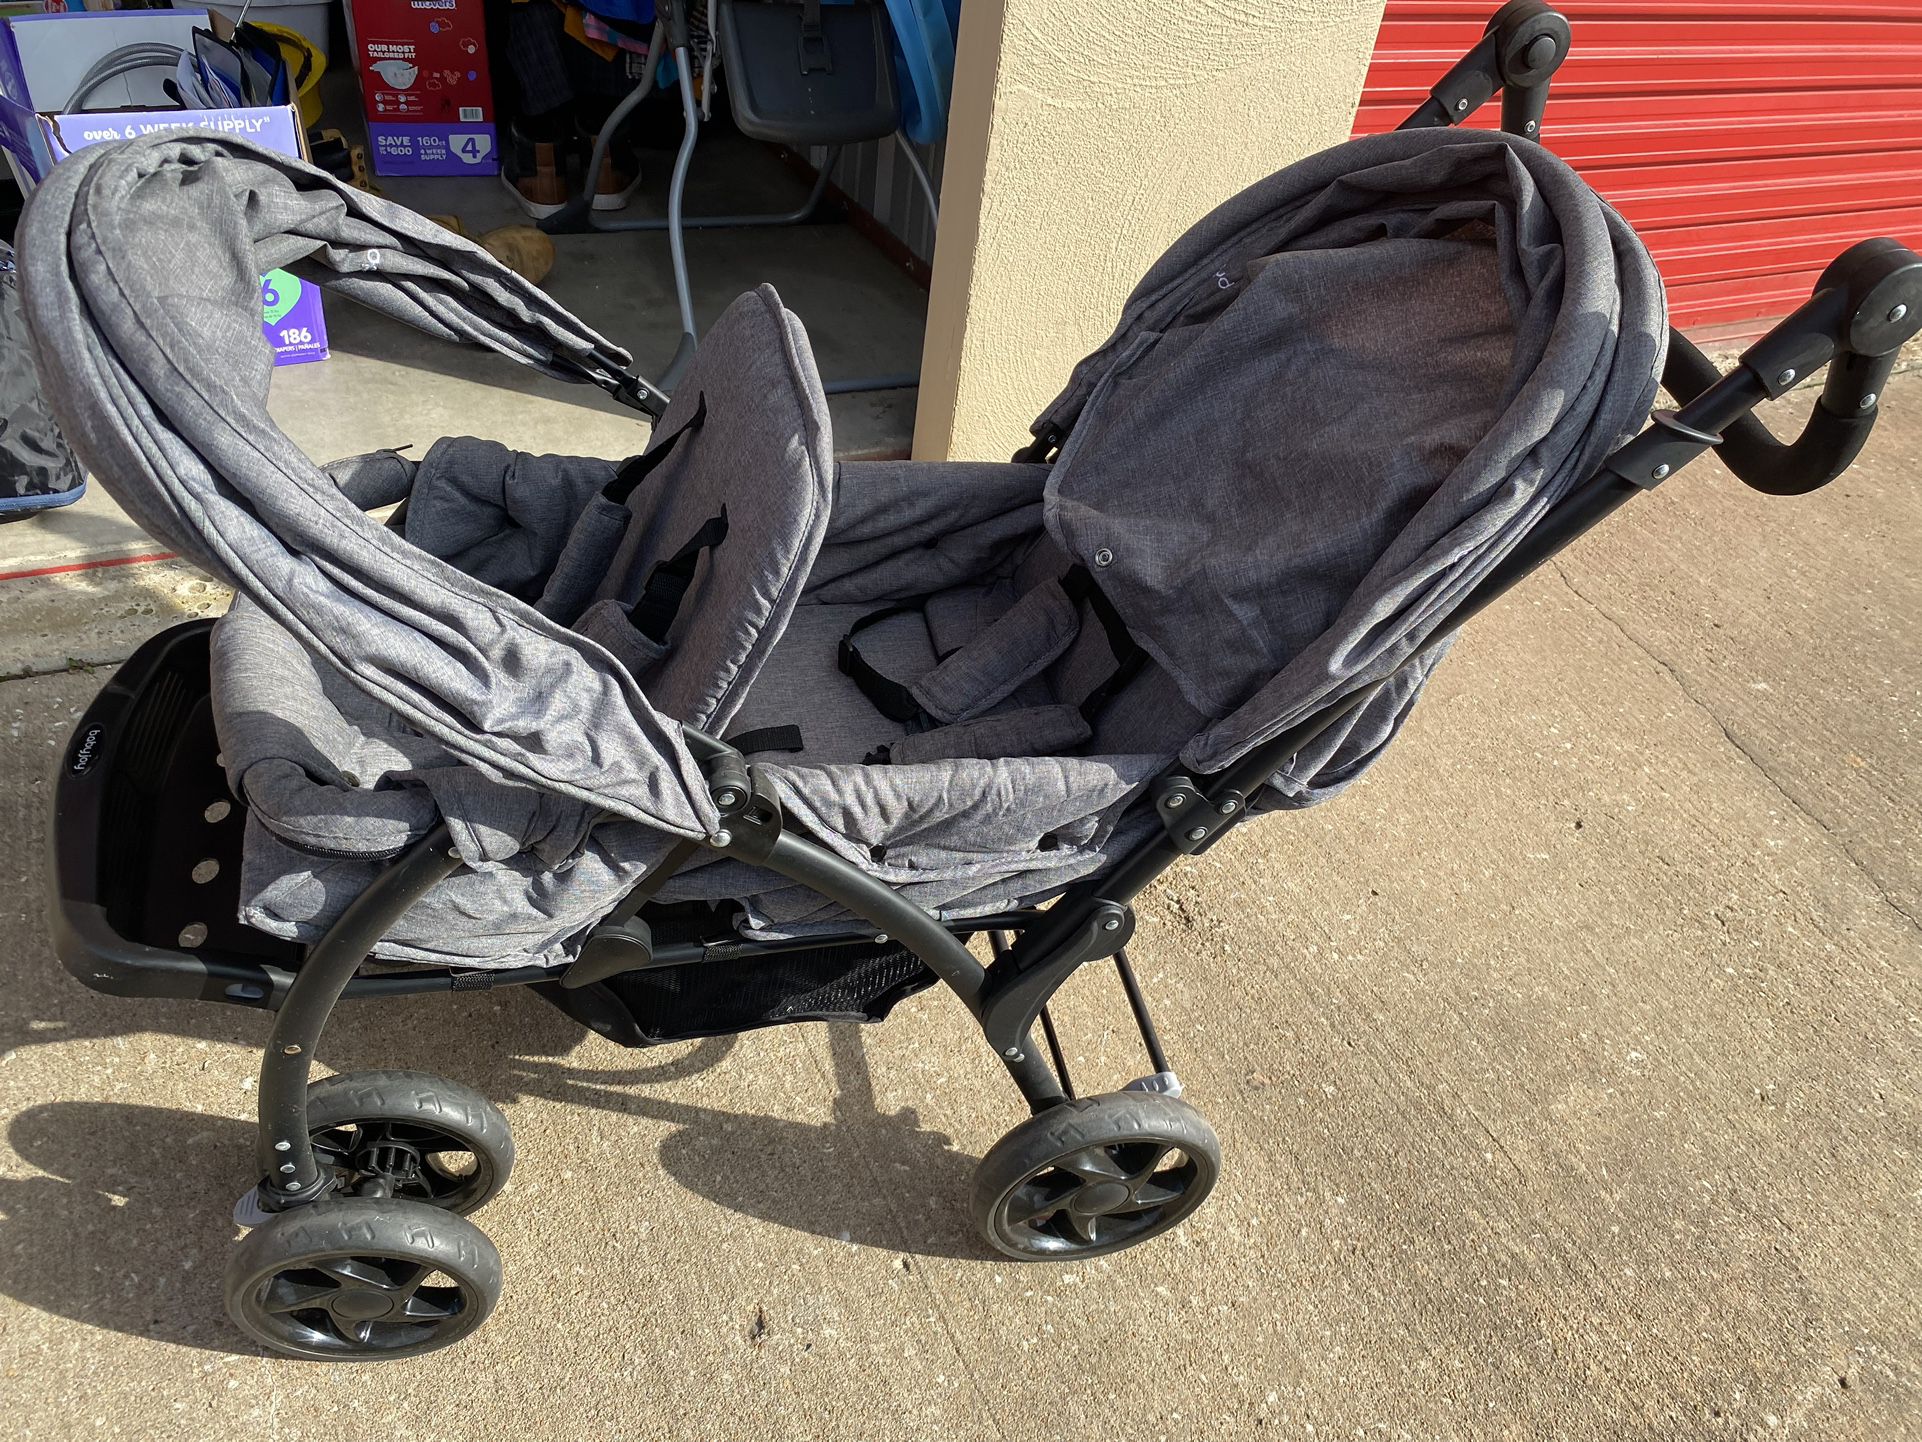 TWO BABY SEAT STROLLER